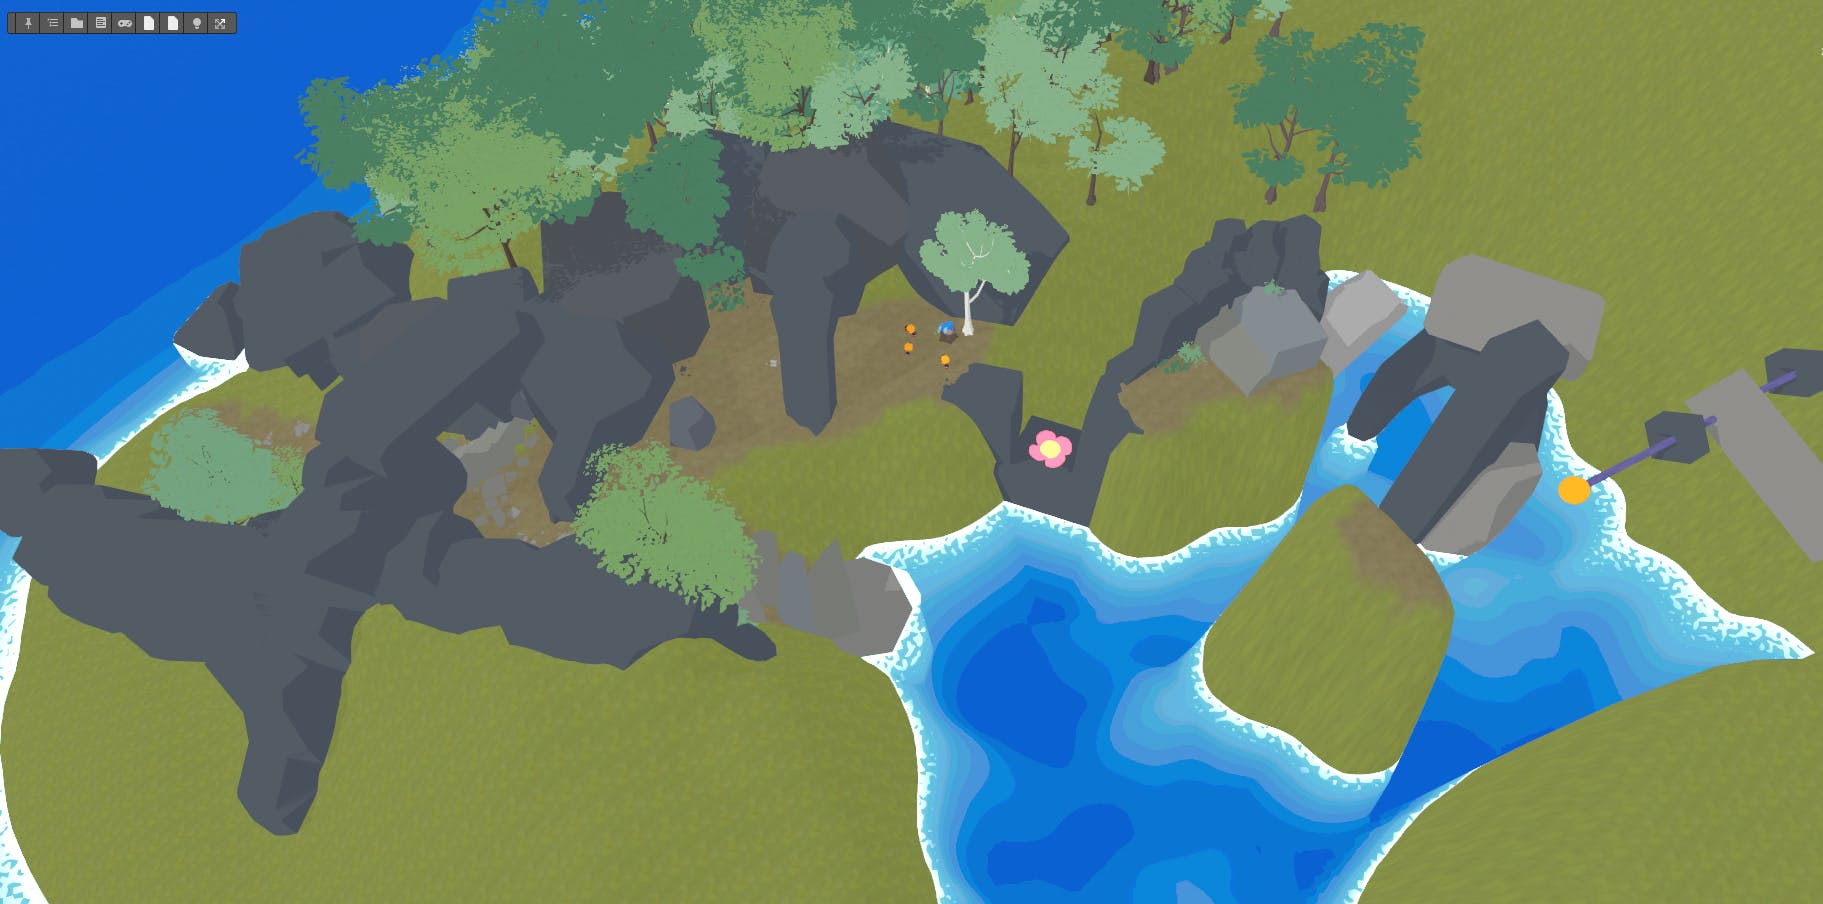 A level featuring grassy, rocky terrain and a lake. The shapes are stylized and simplified.